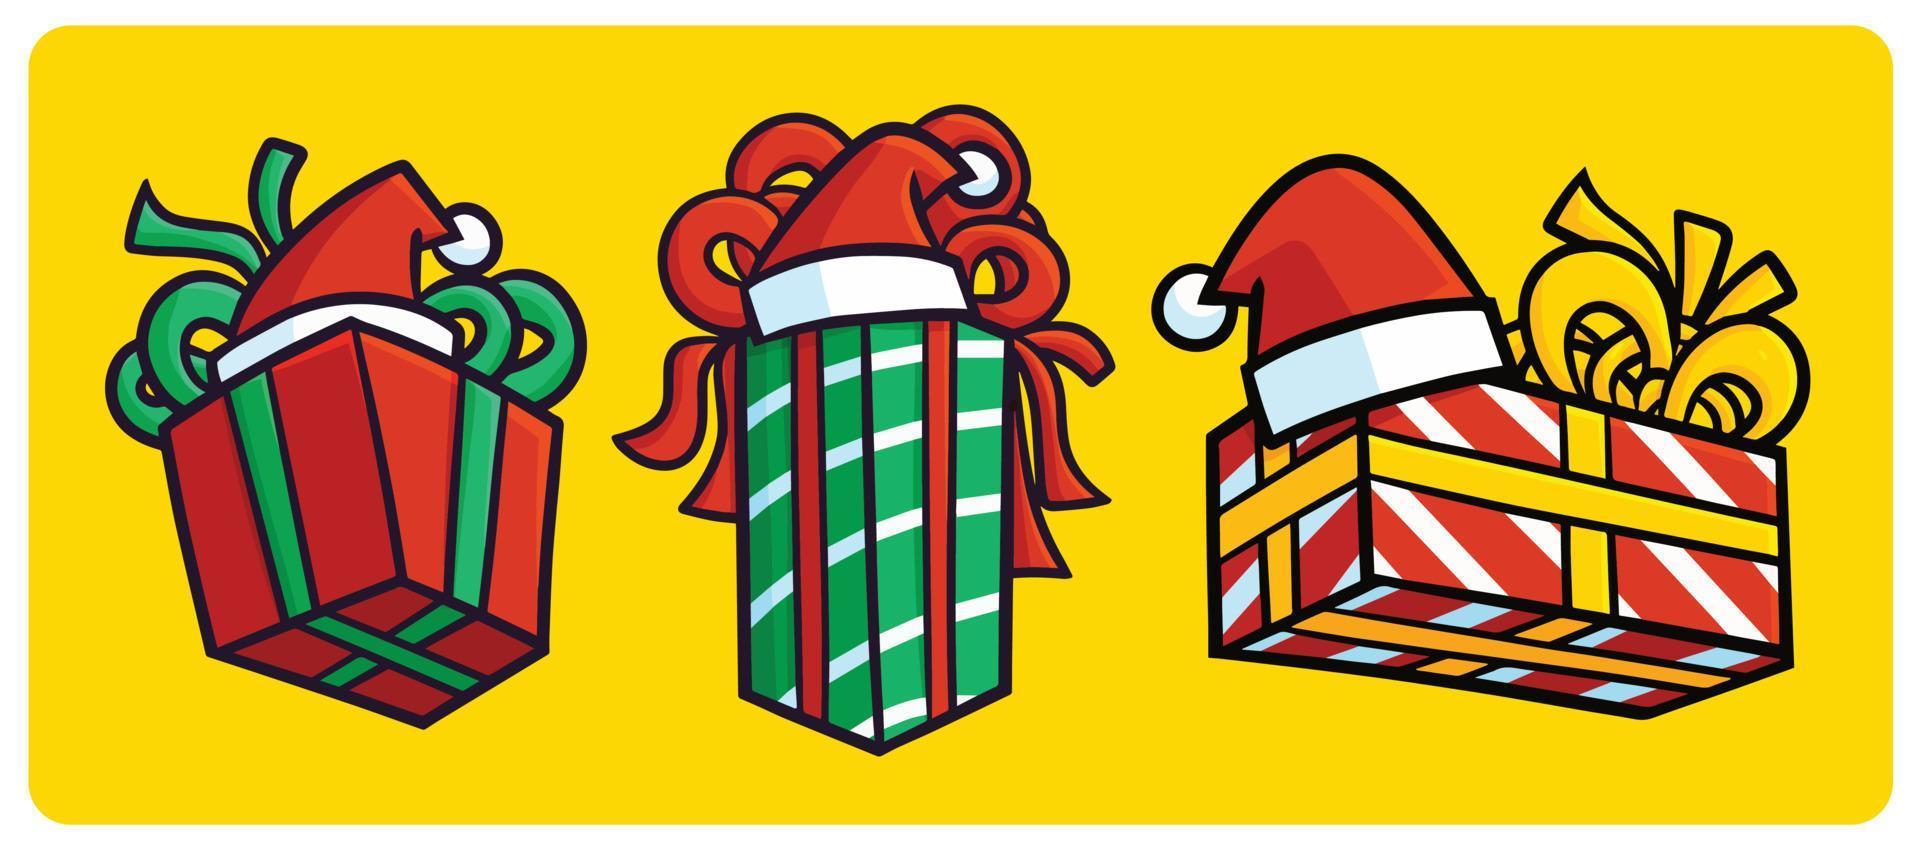 Funny chirstmas presents in cartoon style vector